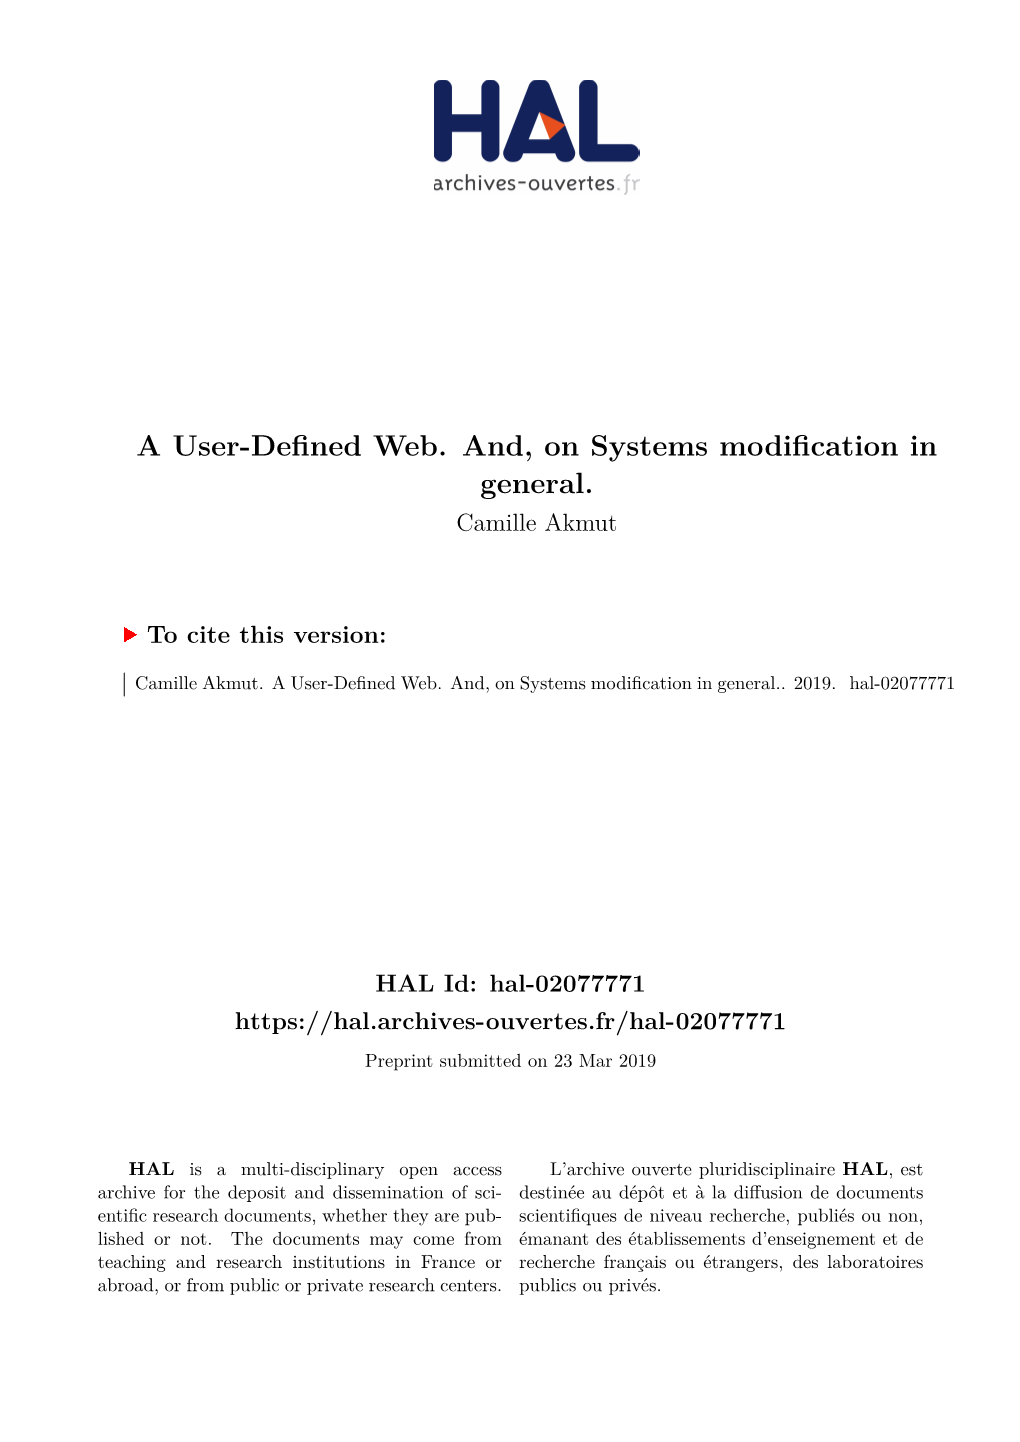 A User-Defined Web. And, on Systems Modification in General. Camille Akmut